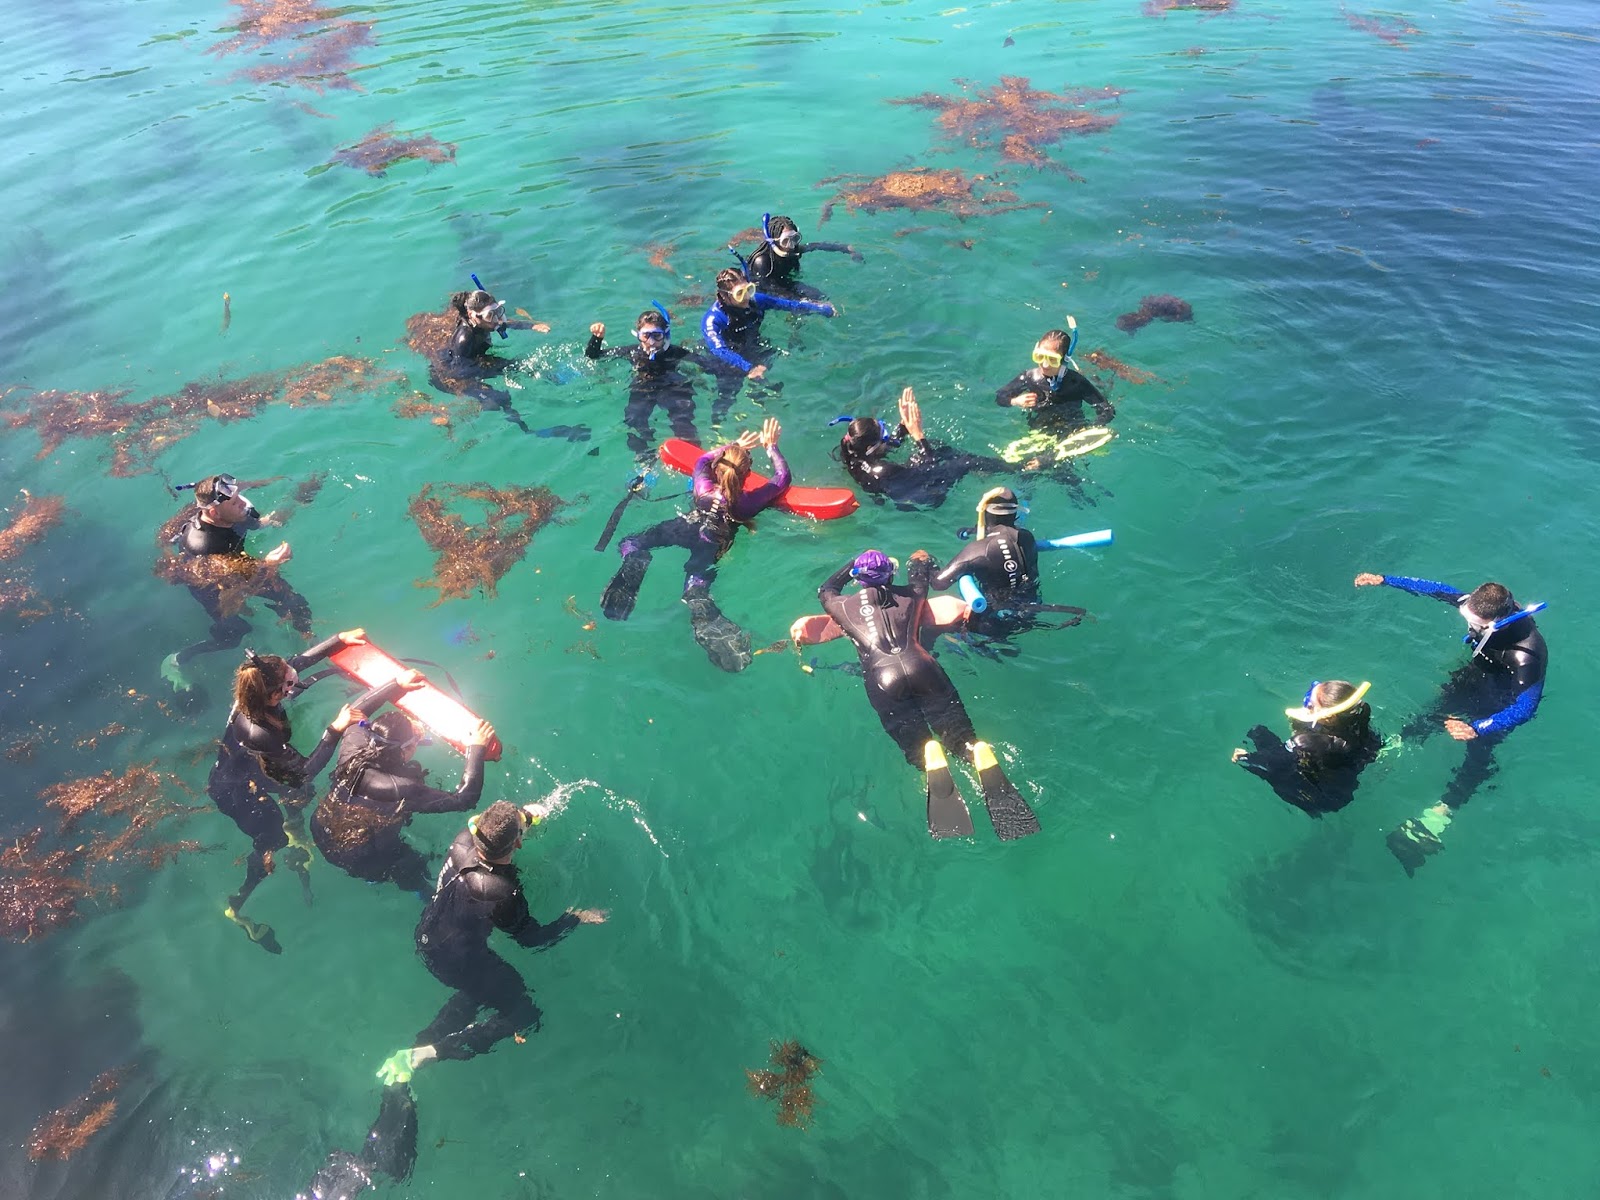 Students snorkeling to collect data.